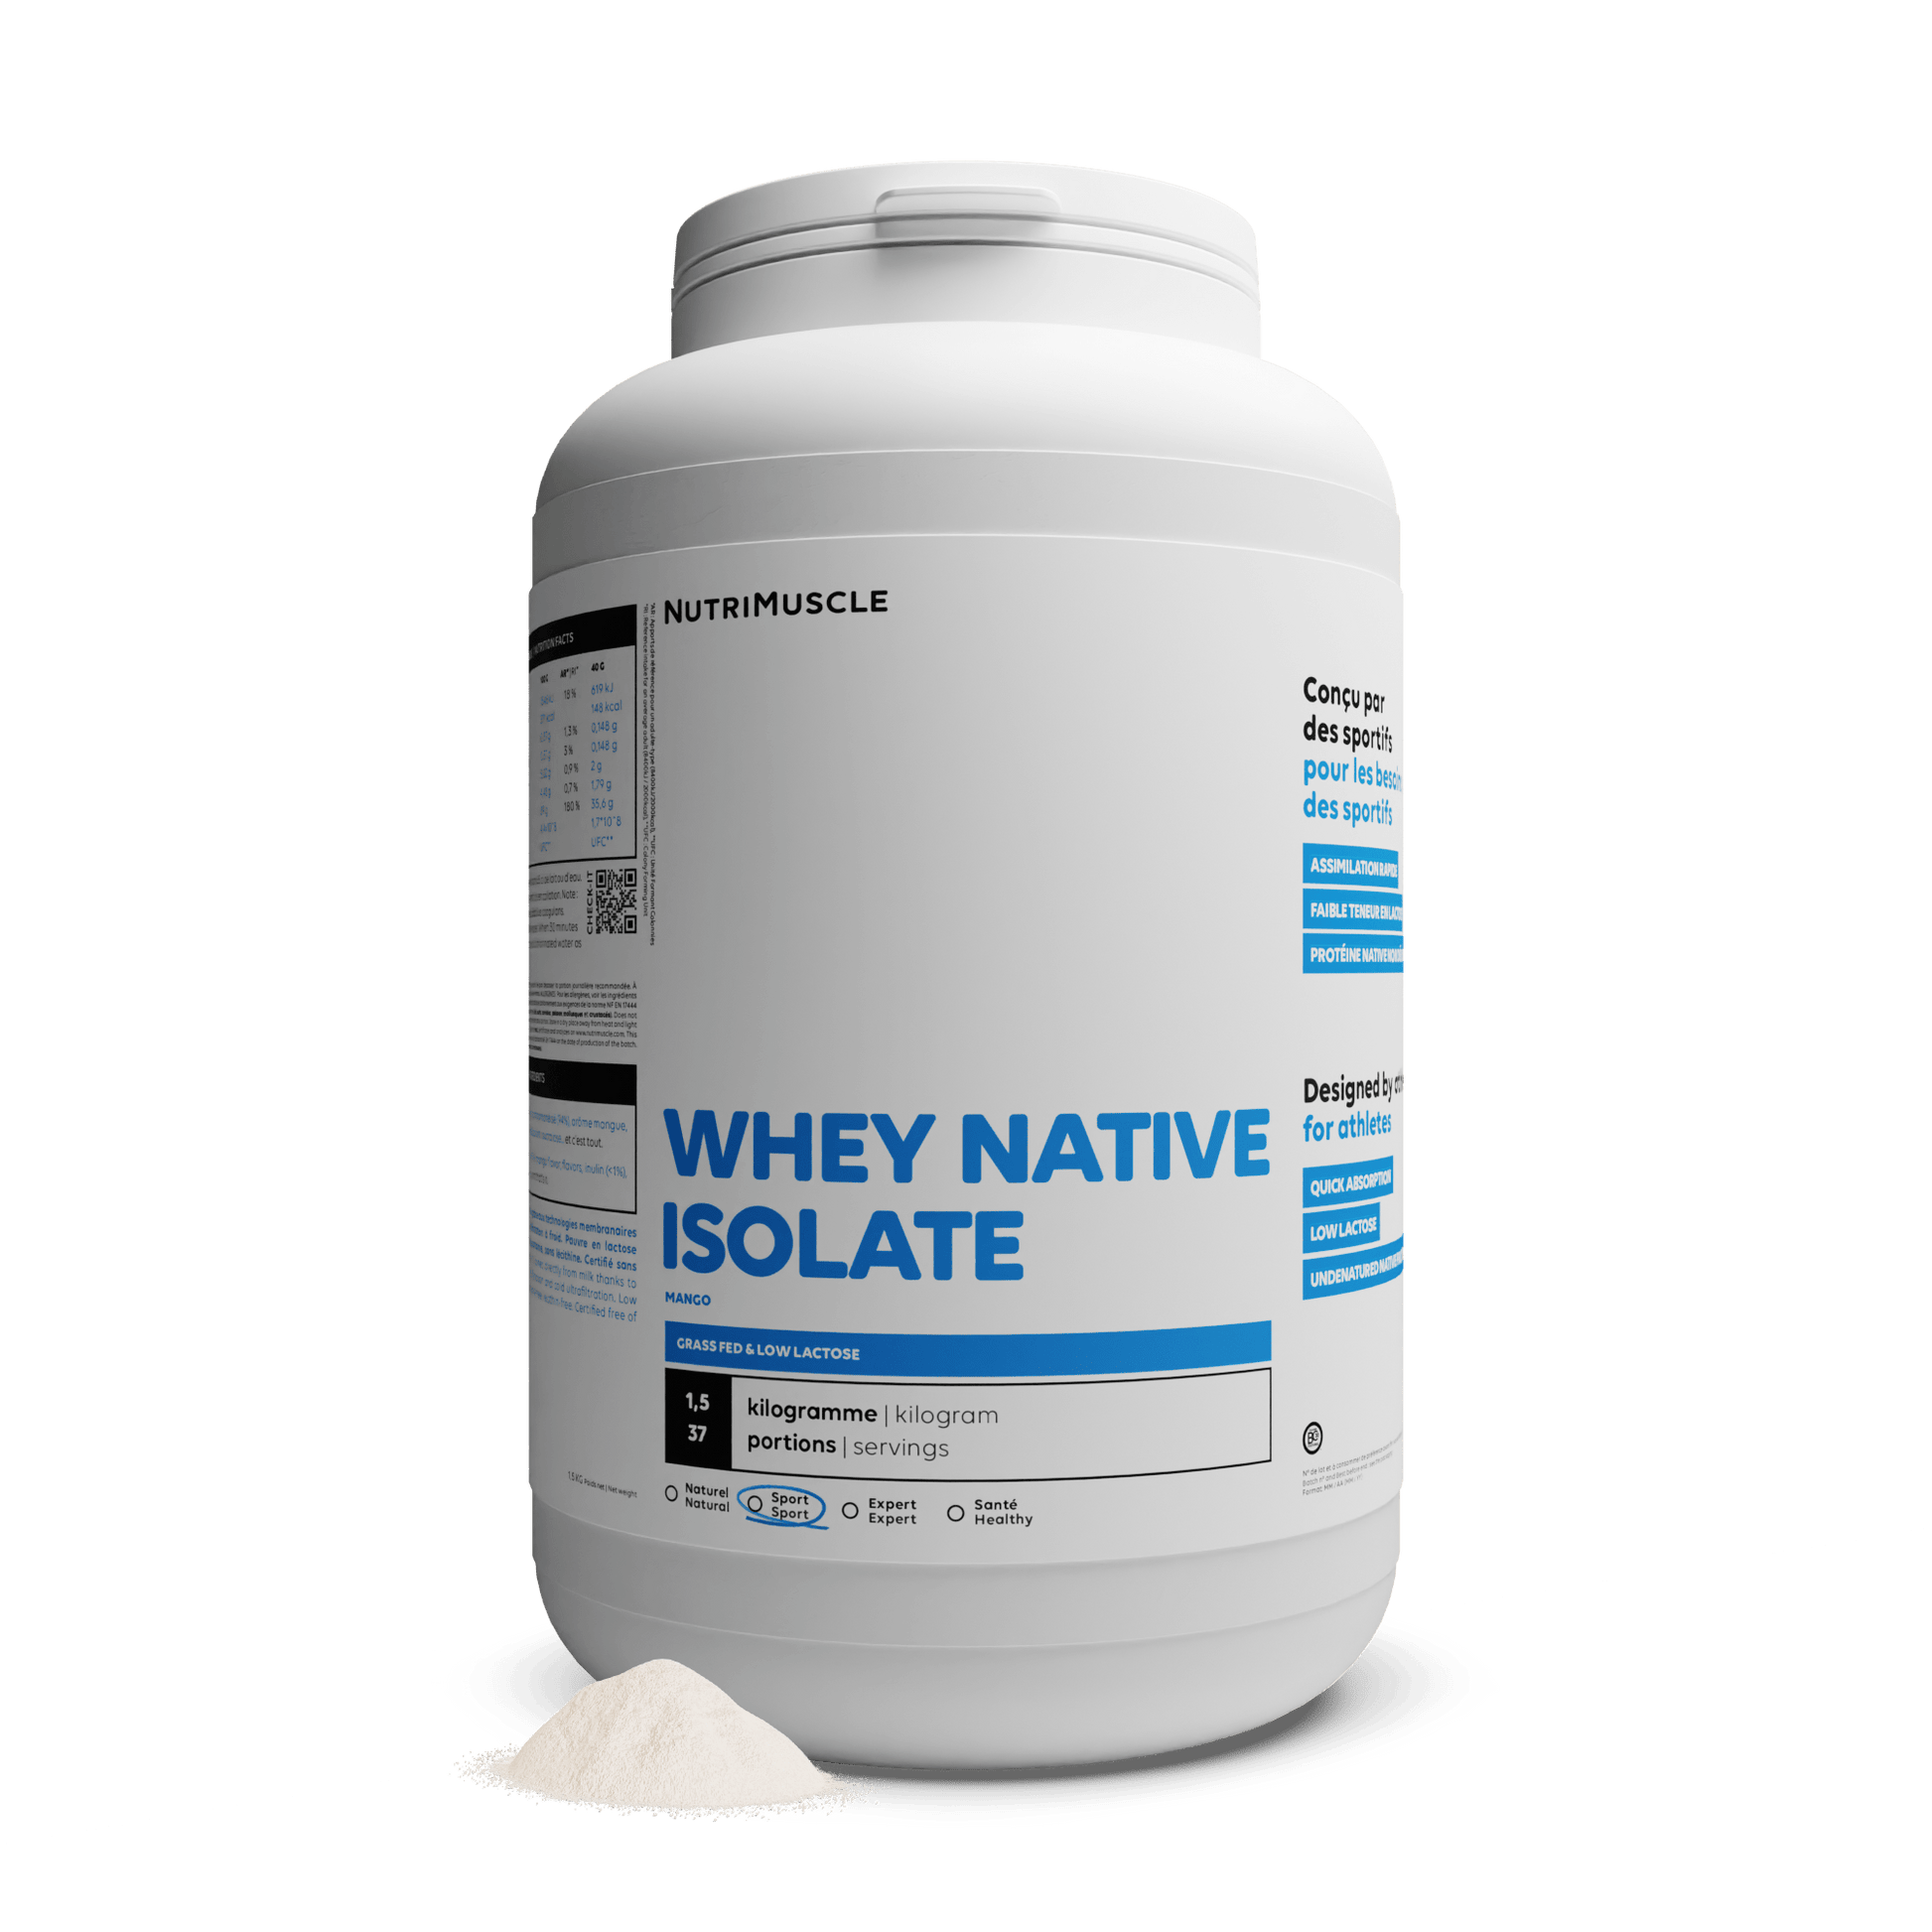 Nutrimuscle Protéines Mangue / 1.50 kg Whey Native Isolate (Low lactose)